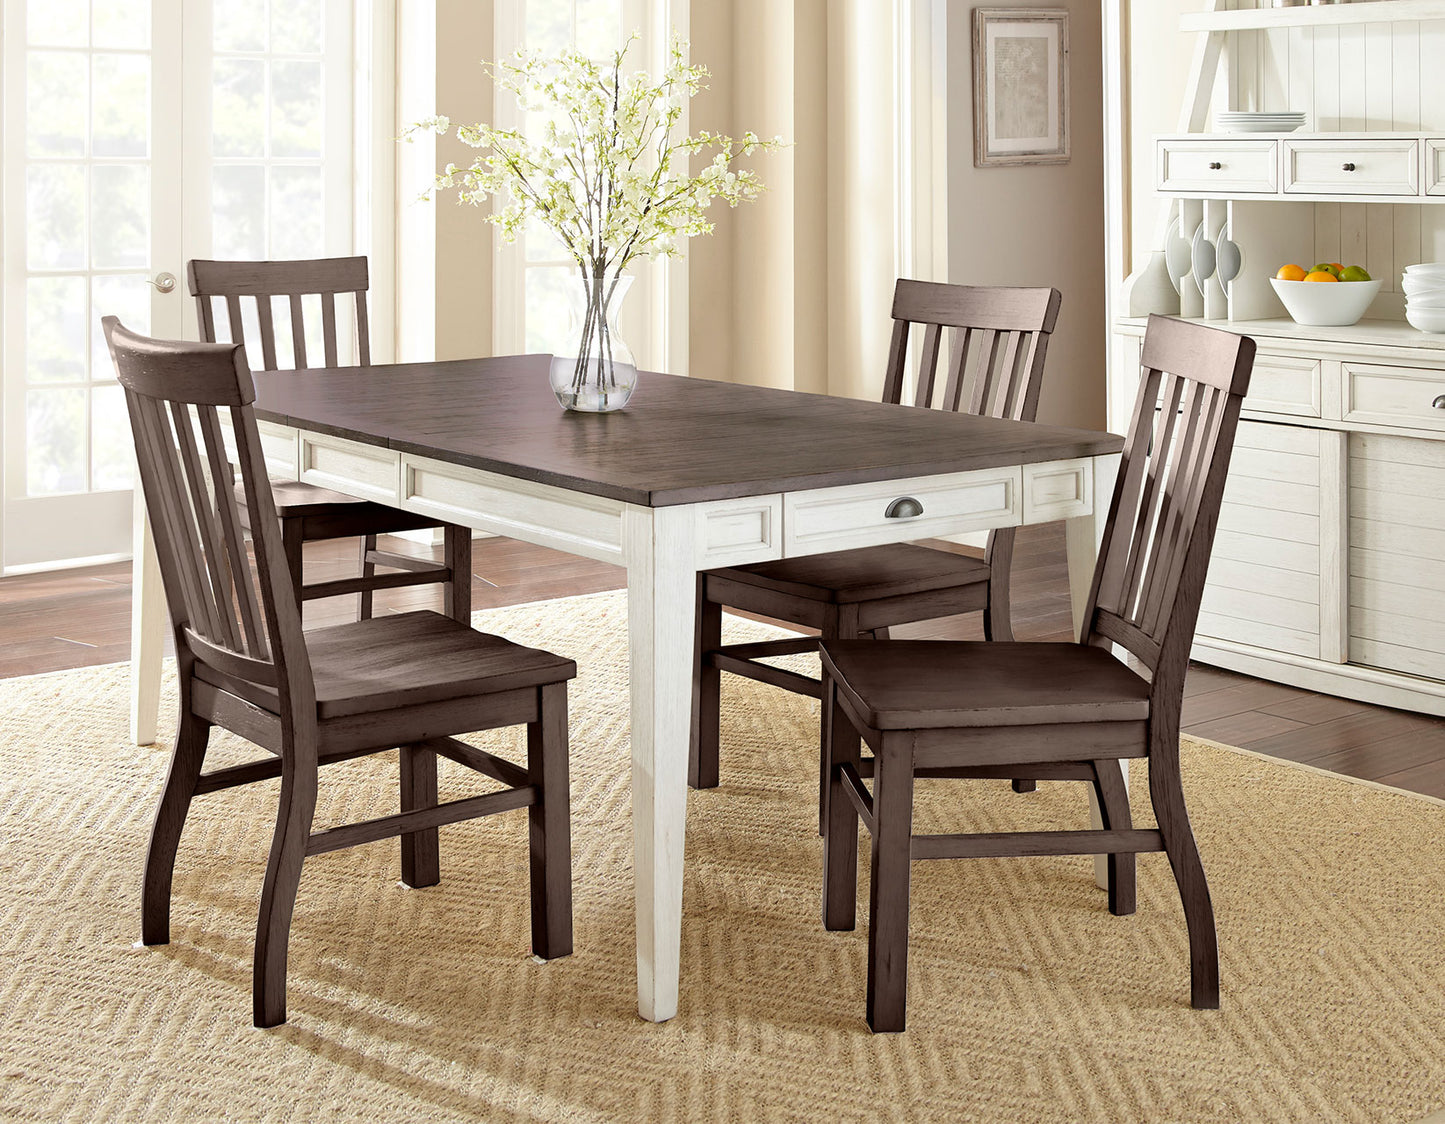 Cayla 5 Piece Two-Tone
(Table & 4 Side Chairs)